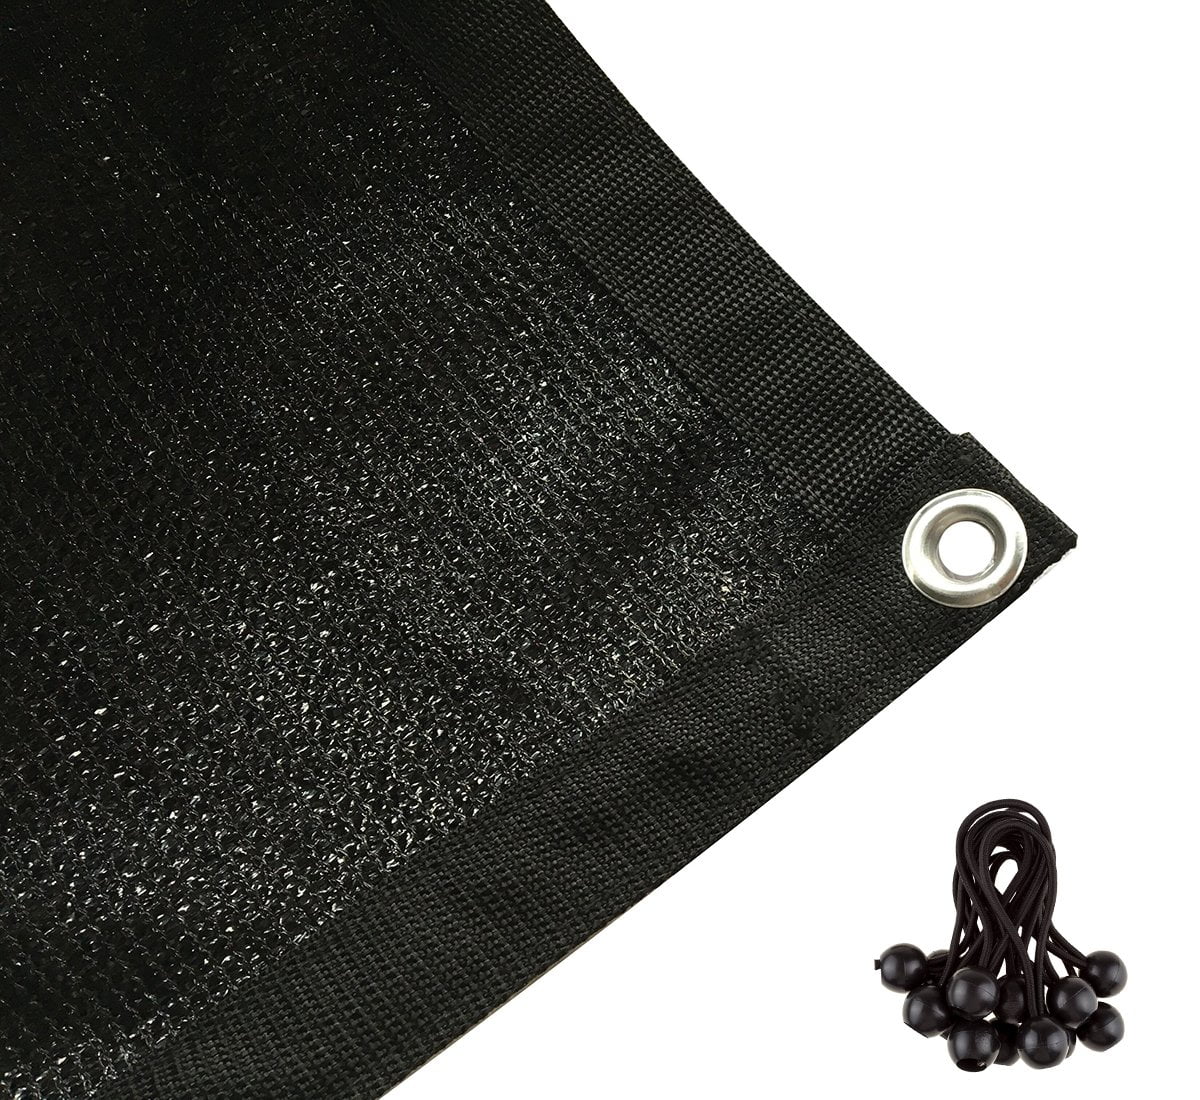 e.share 40% Shade Cloth Black Premium Mesh Shade Panel with Grommets 12ft x 16ft